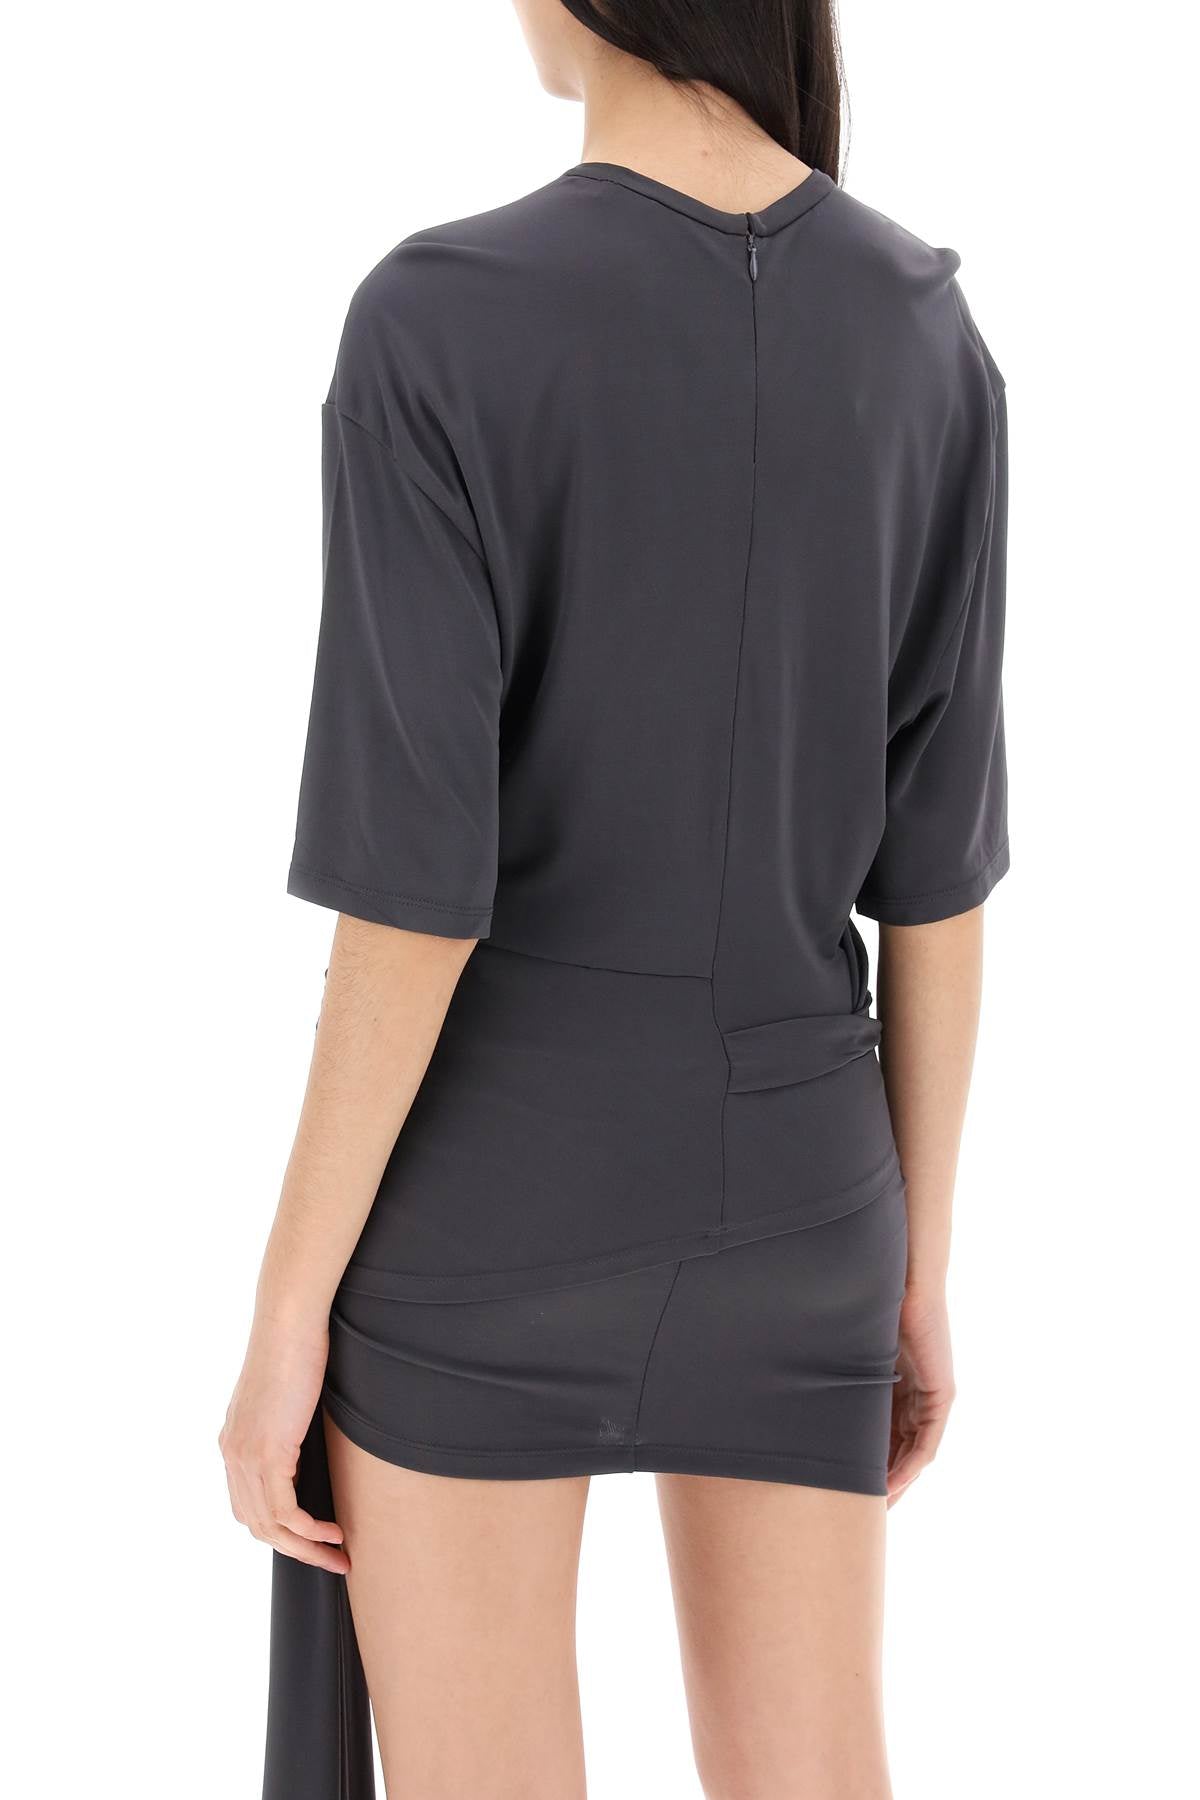 Christopher Esber Top With Side Draping Detail   Grey